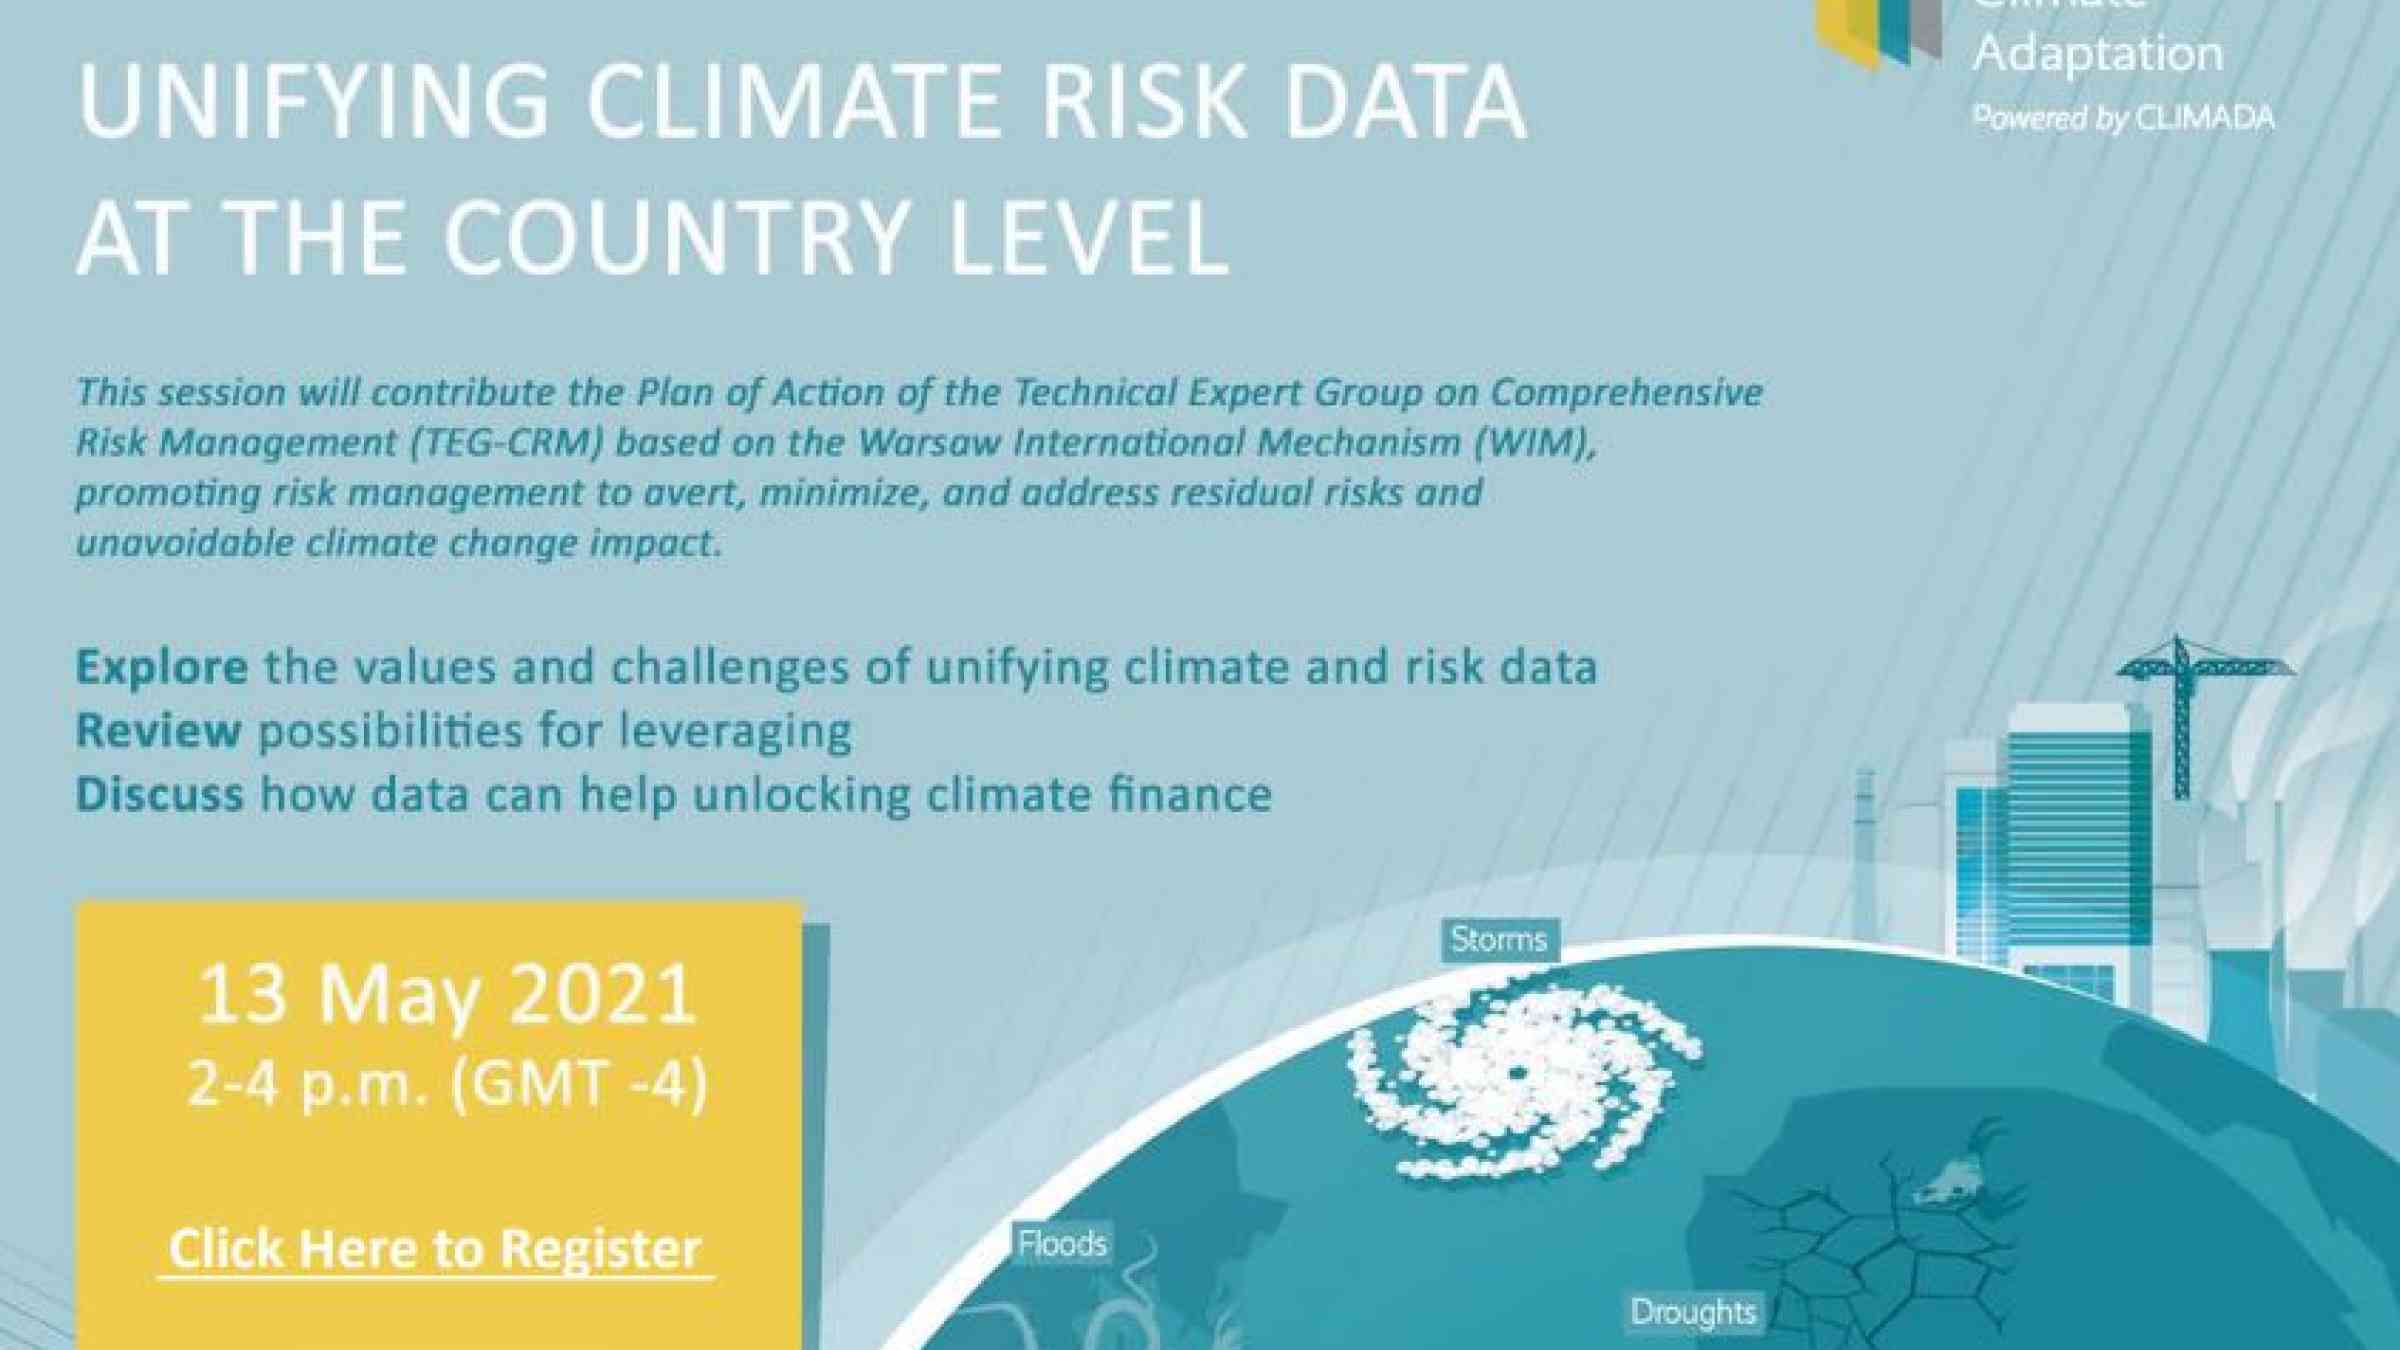 UNDRR ROAMC: Unifying climate risk data at the country level | UNDRRその他